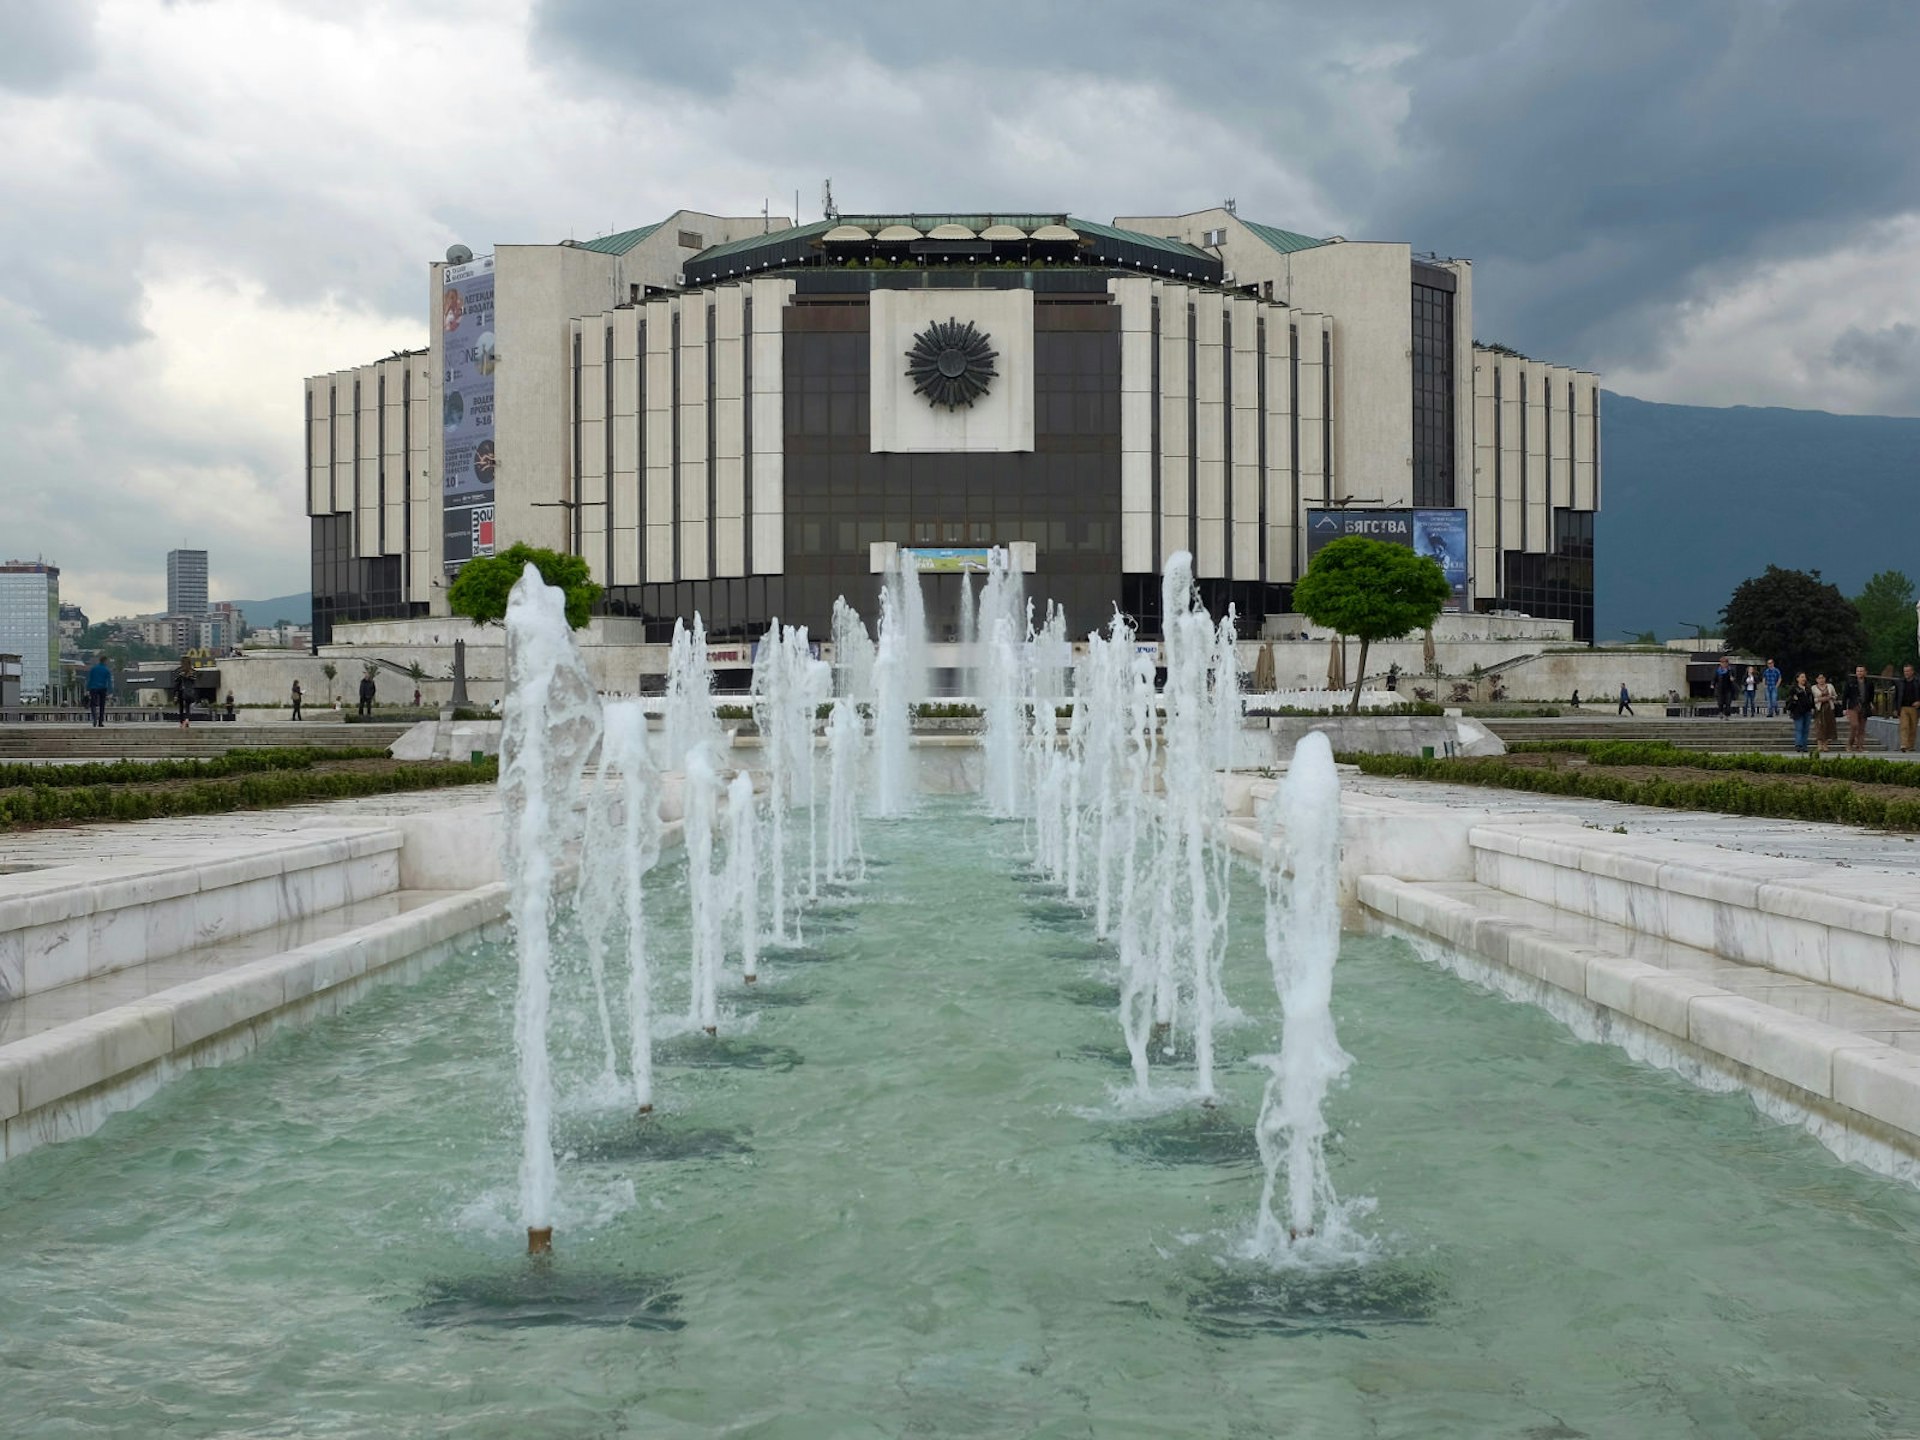 Sofia's monumental National Palace of Culture (NDK) © Mark Baker / Lonely Planet